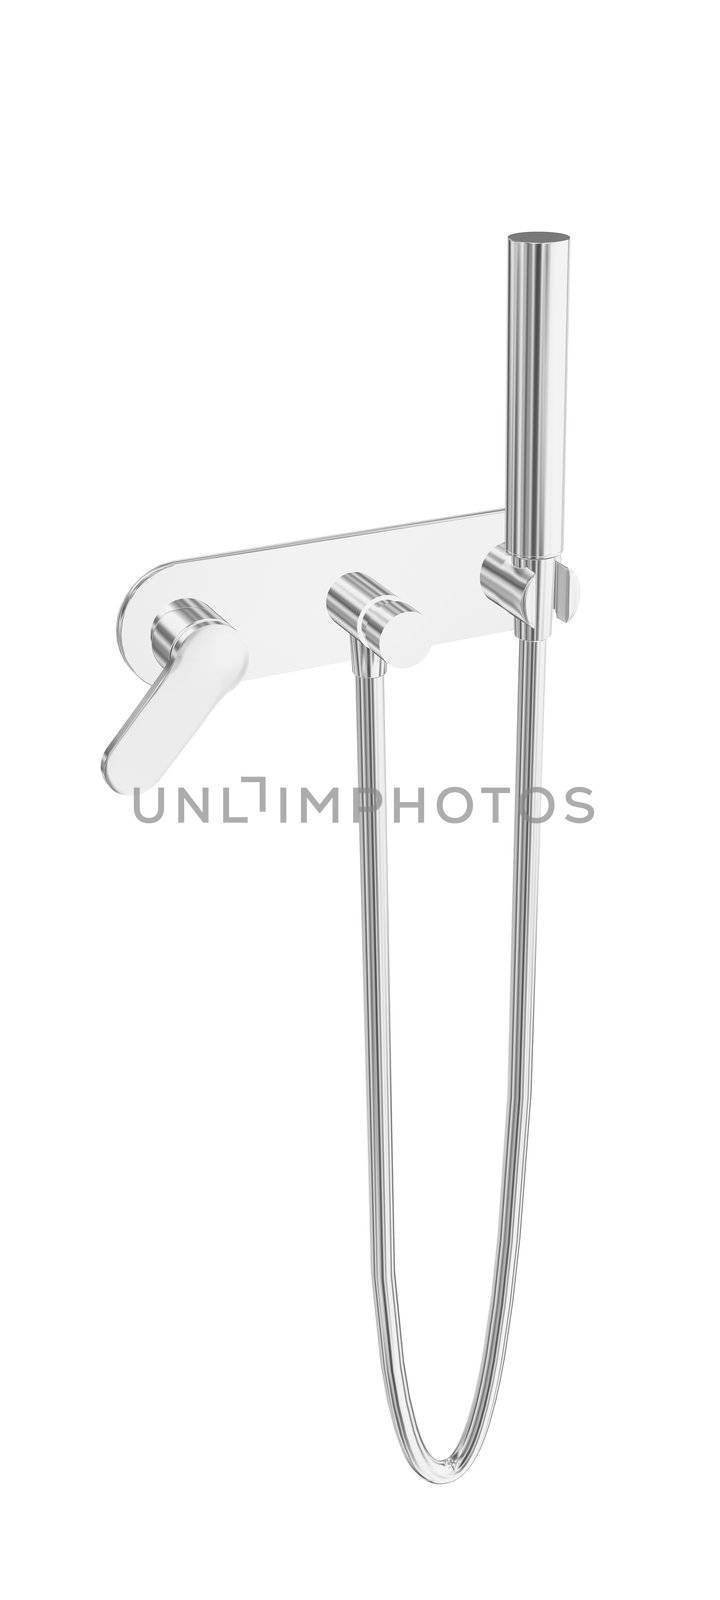 Modern hand-held water spray chrome shower fixtures 3D illustration,  isolated against a white background